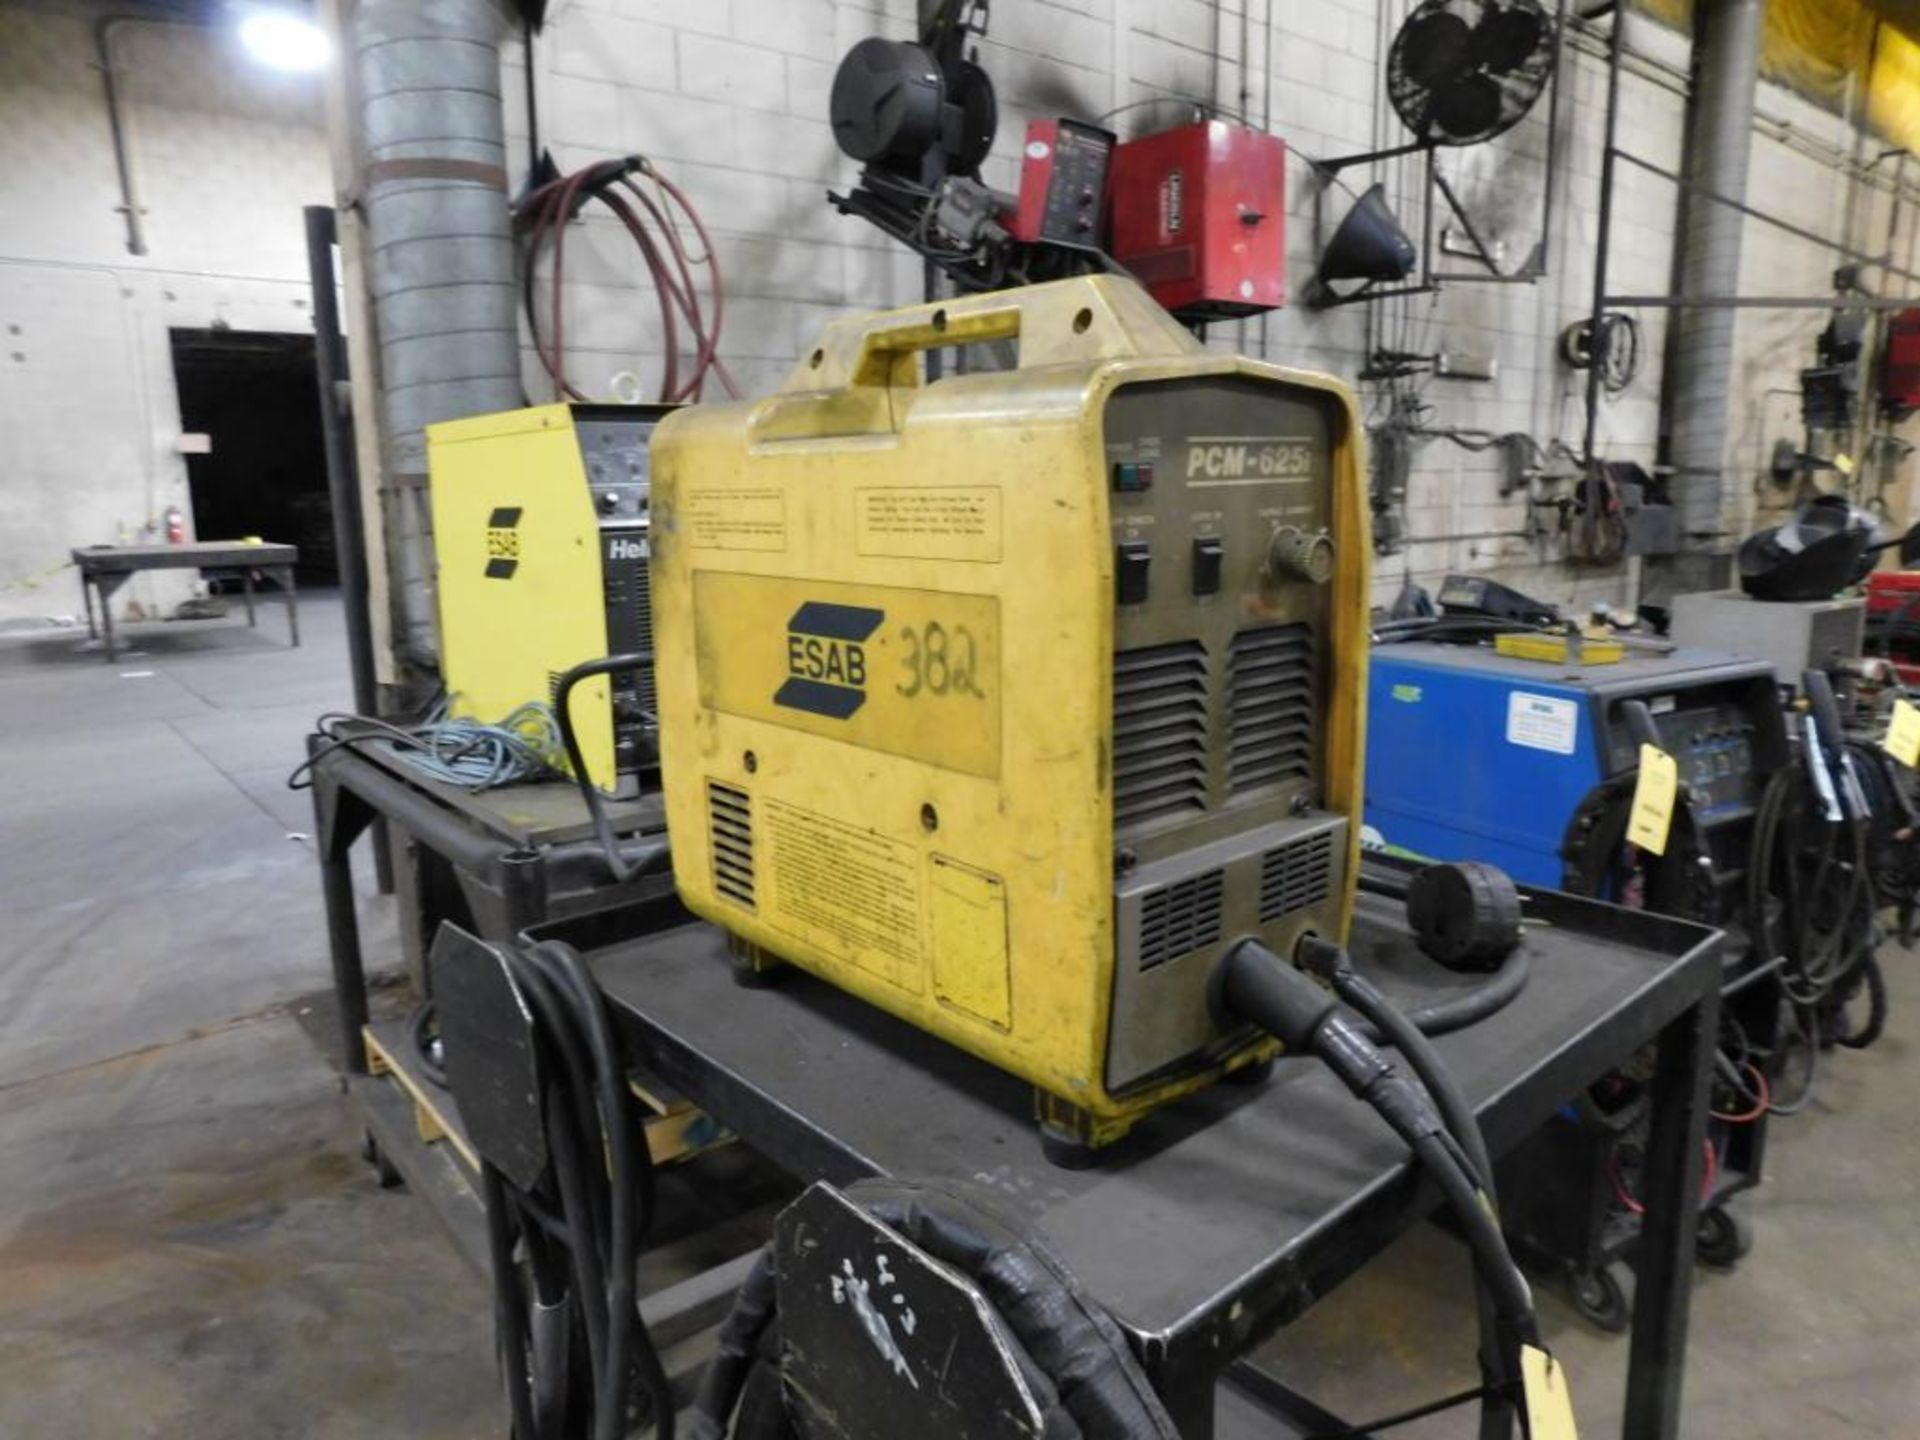 ESAB 40 Amp Plasma Cutter Model PMC-625i, S/N PA-1517272, Torch, Cables, Cart